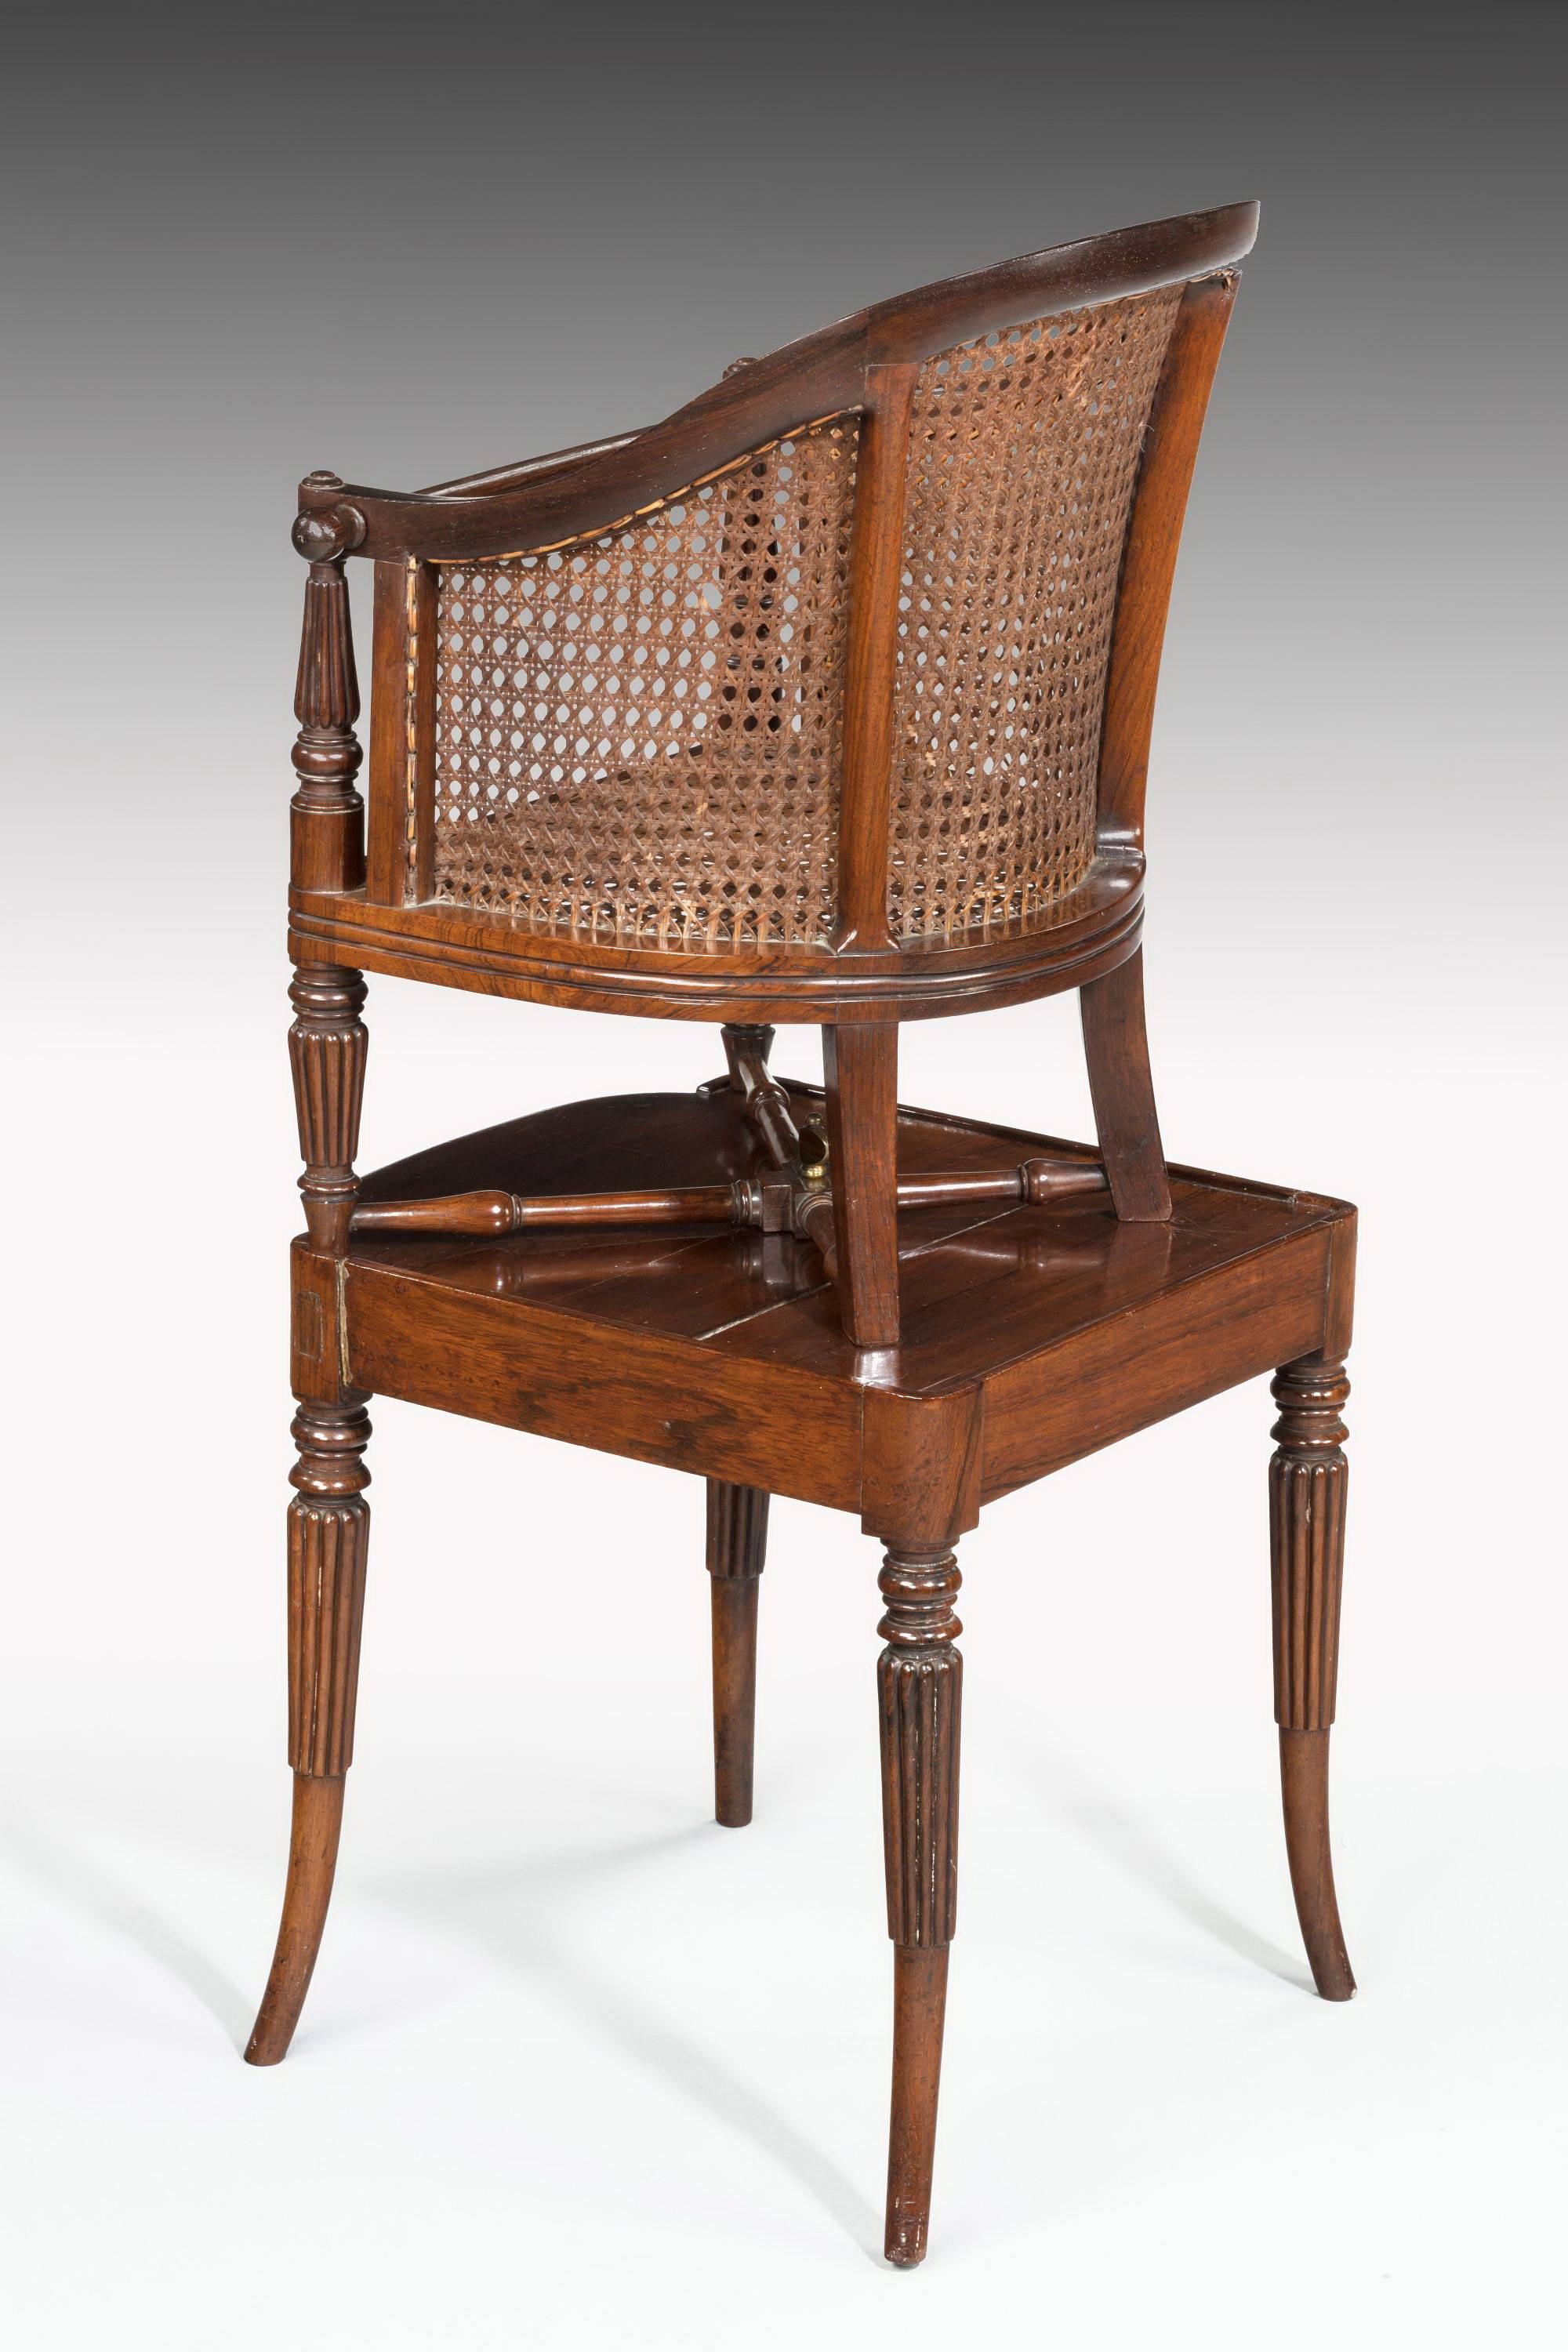 English Regency Period Child's Chair on Stand